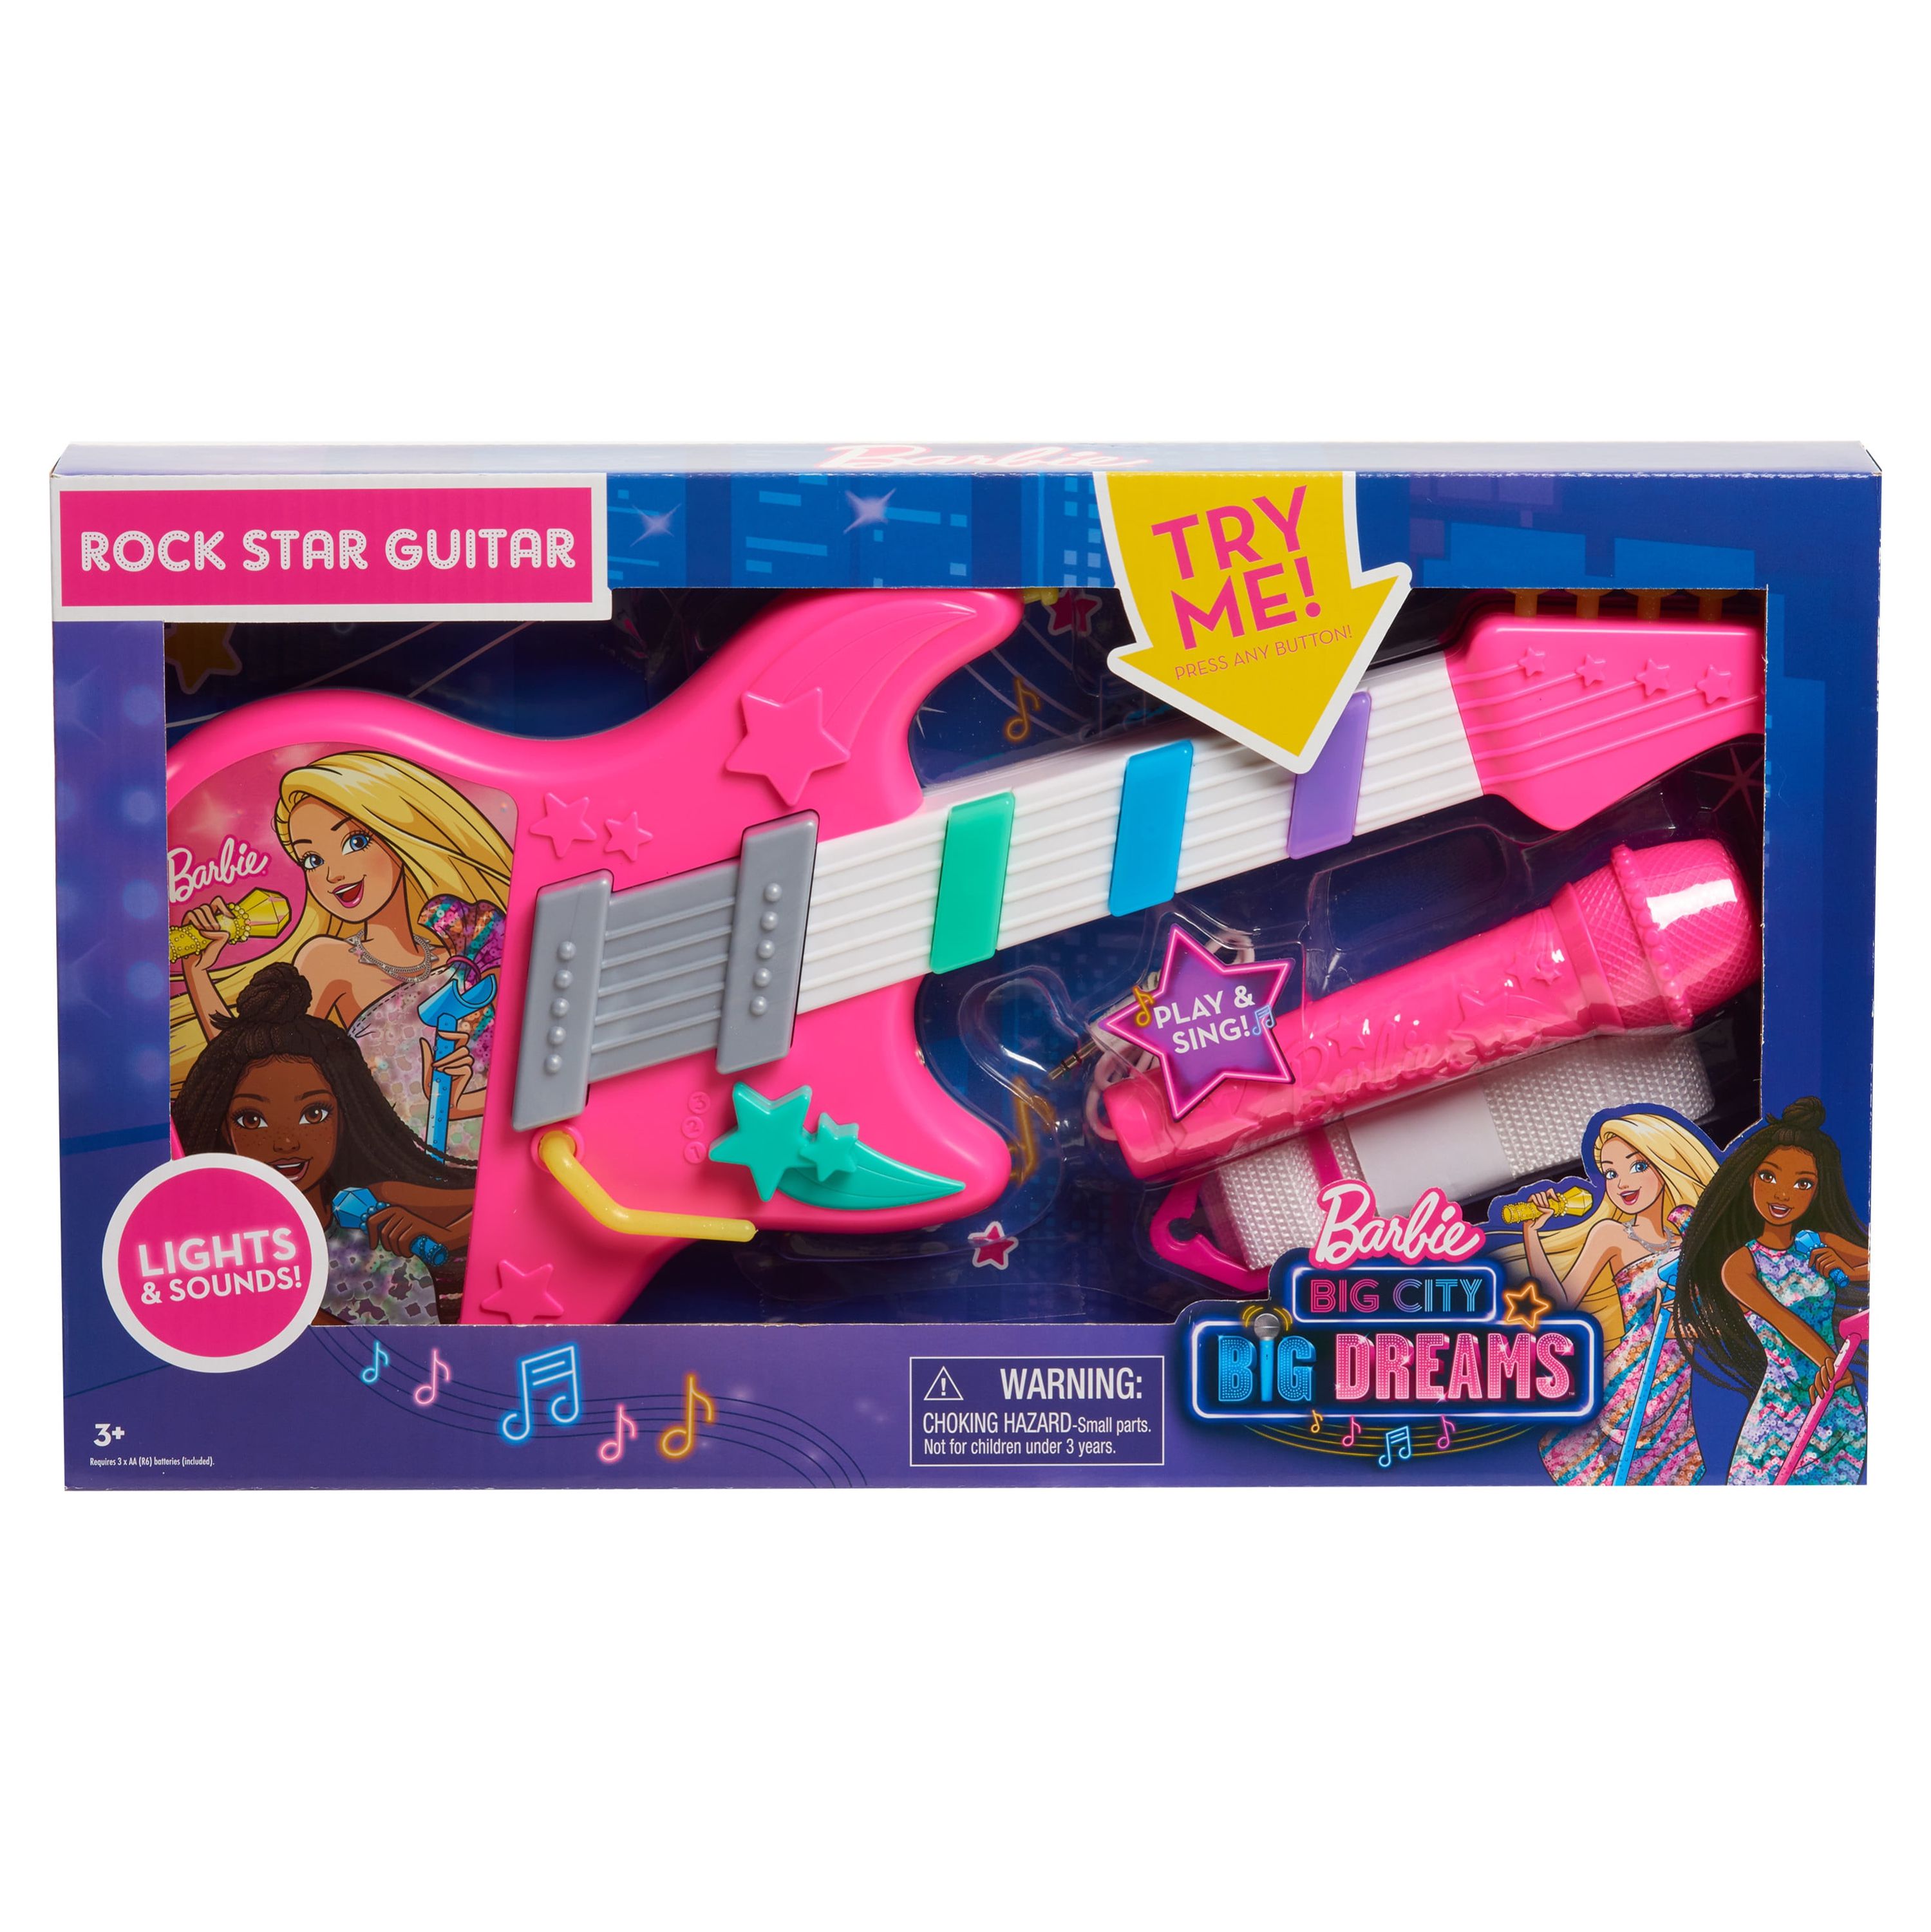 Barbie Rock Star Guitar, Interactive Electronic Toy Guitar with Lights, Sounds, and Microphone,  Kids Toys for Ages 3 Up, Gifts and Presents - image 11 of 11